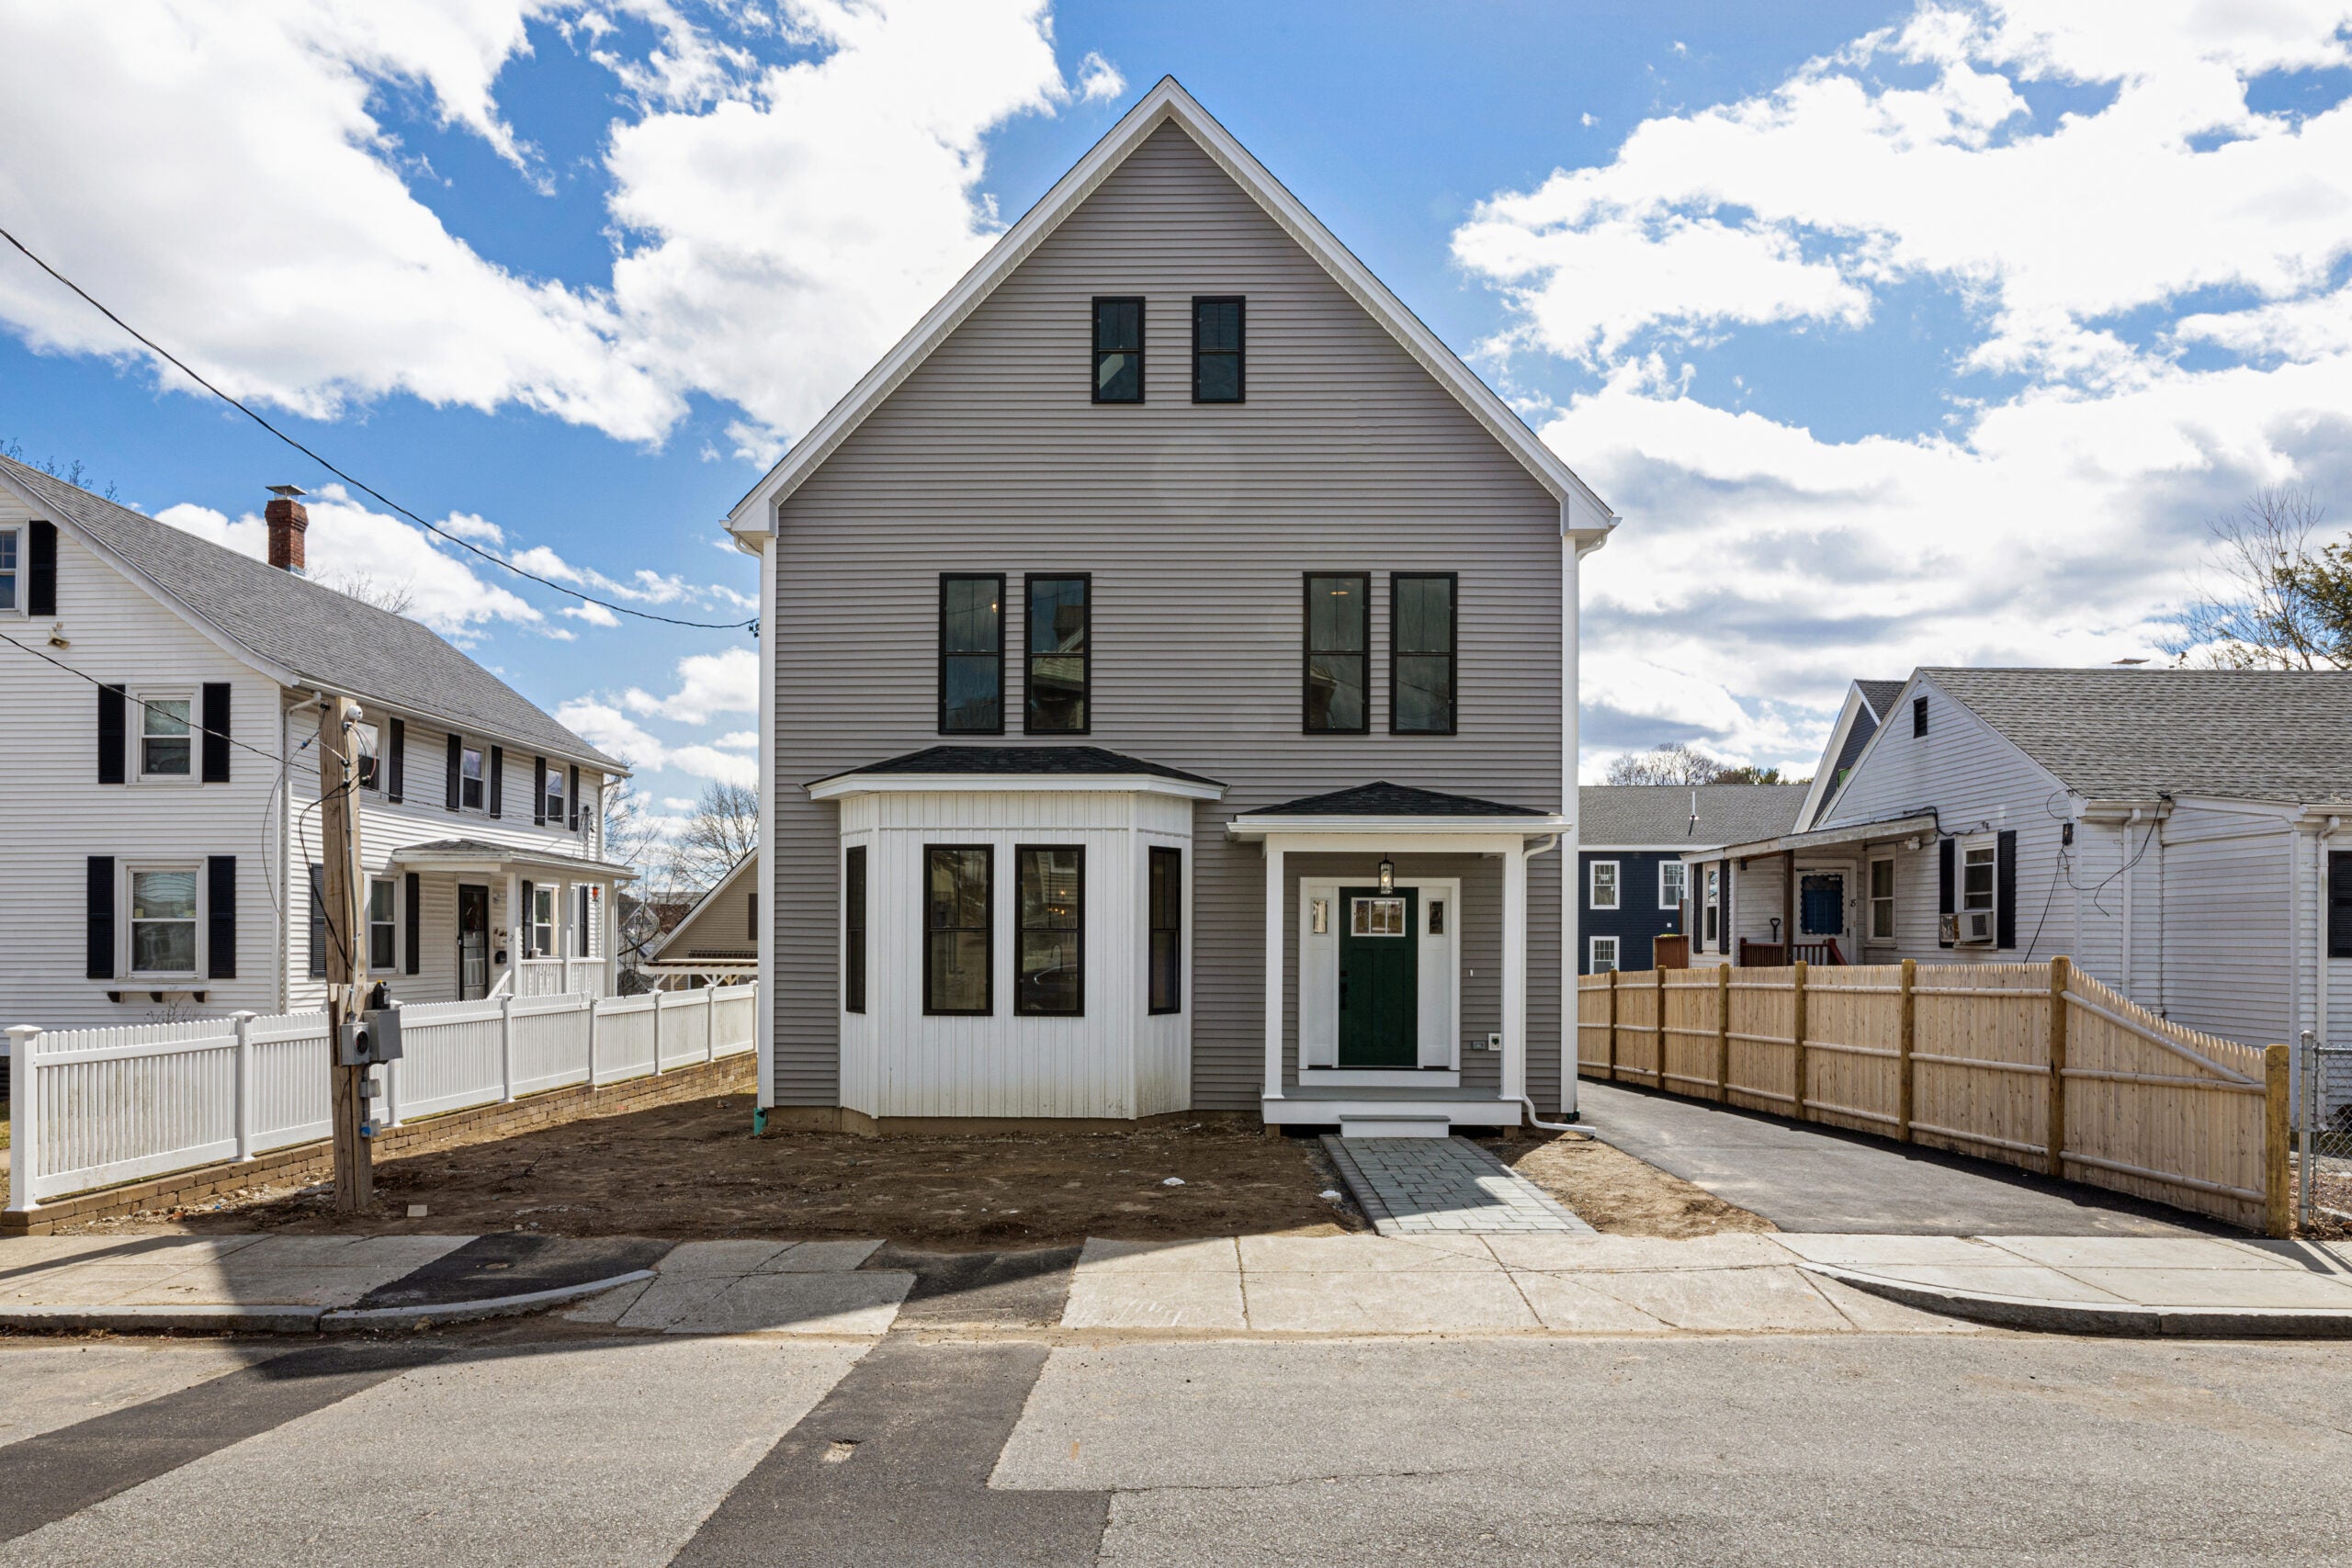 A front-on view of a gray three-story home with an A-frame roof, gray siding, a white bow window bump-out, and a small front porch with a gable roof. A driveway runs along the right side. Fences define the yard. The sky is blue with clouds. Home of the Week in Mattapan.